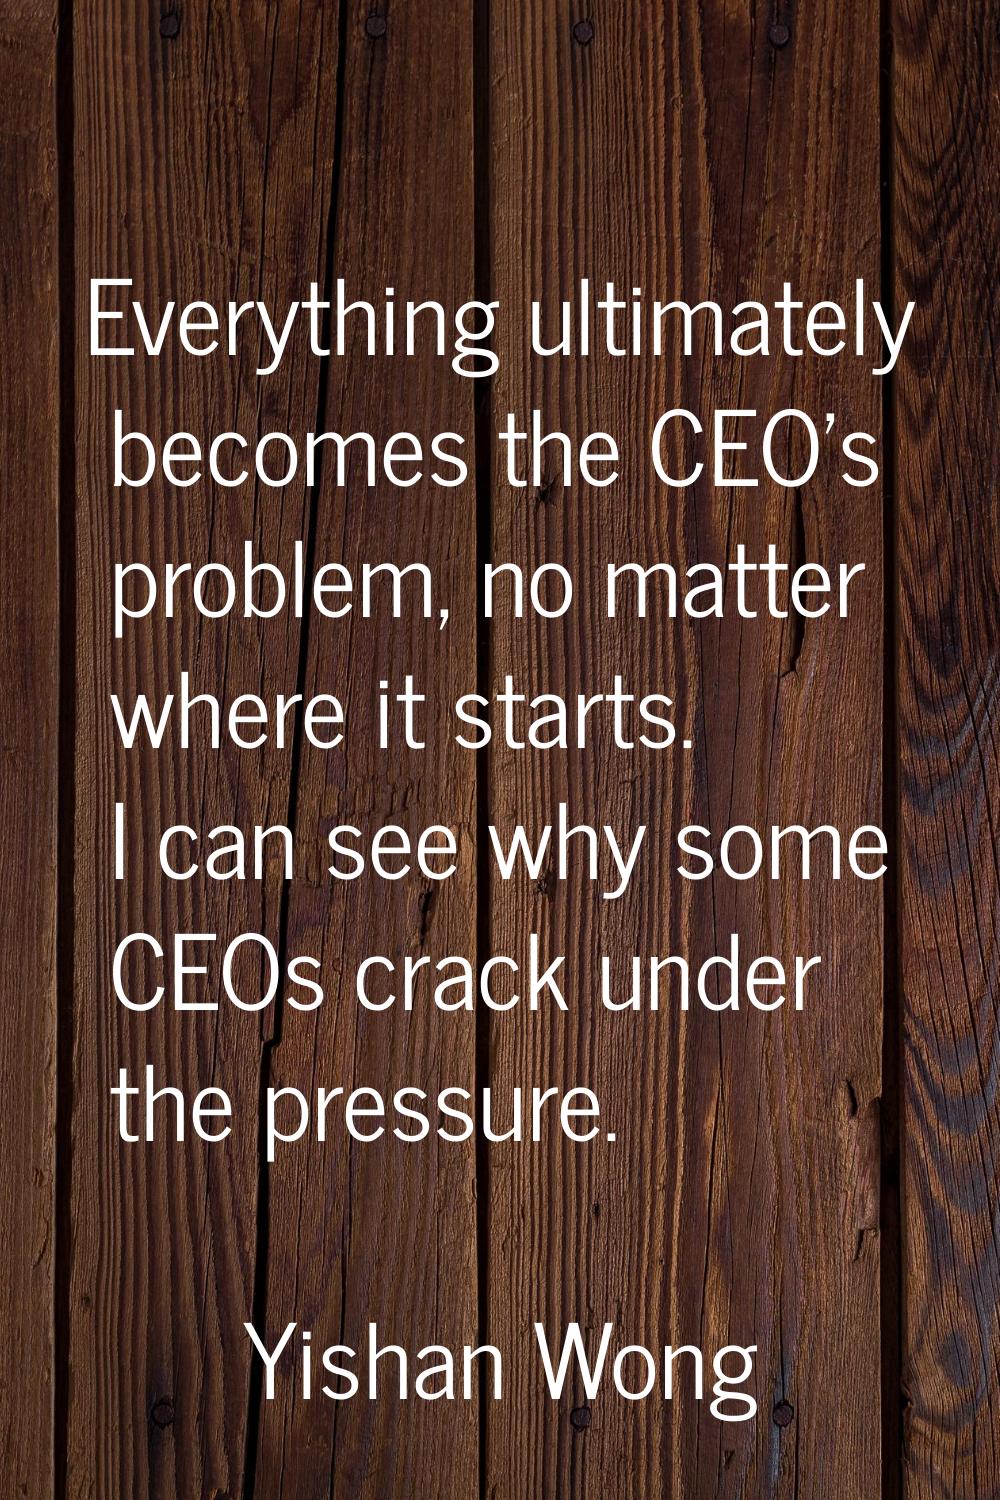 Everything ultimately becomes the CEO's problem, no matter where it starts. I can see why some CEOs